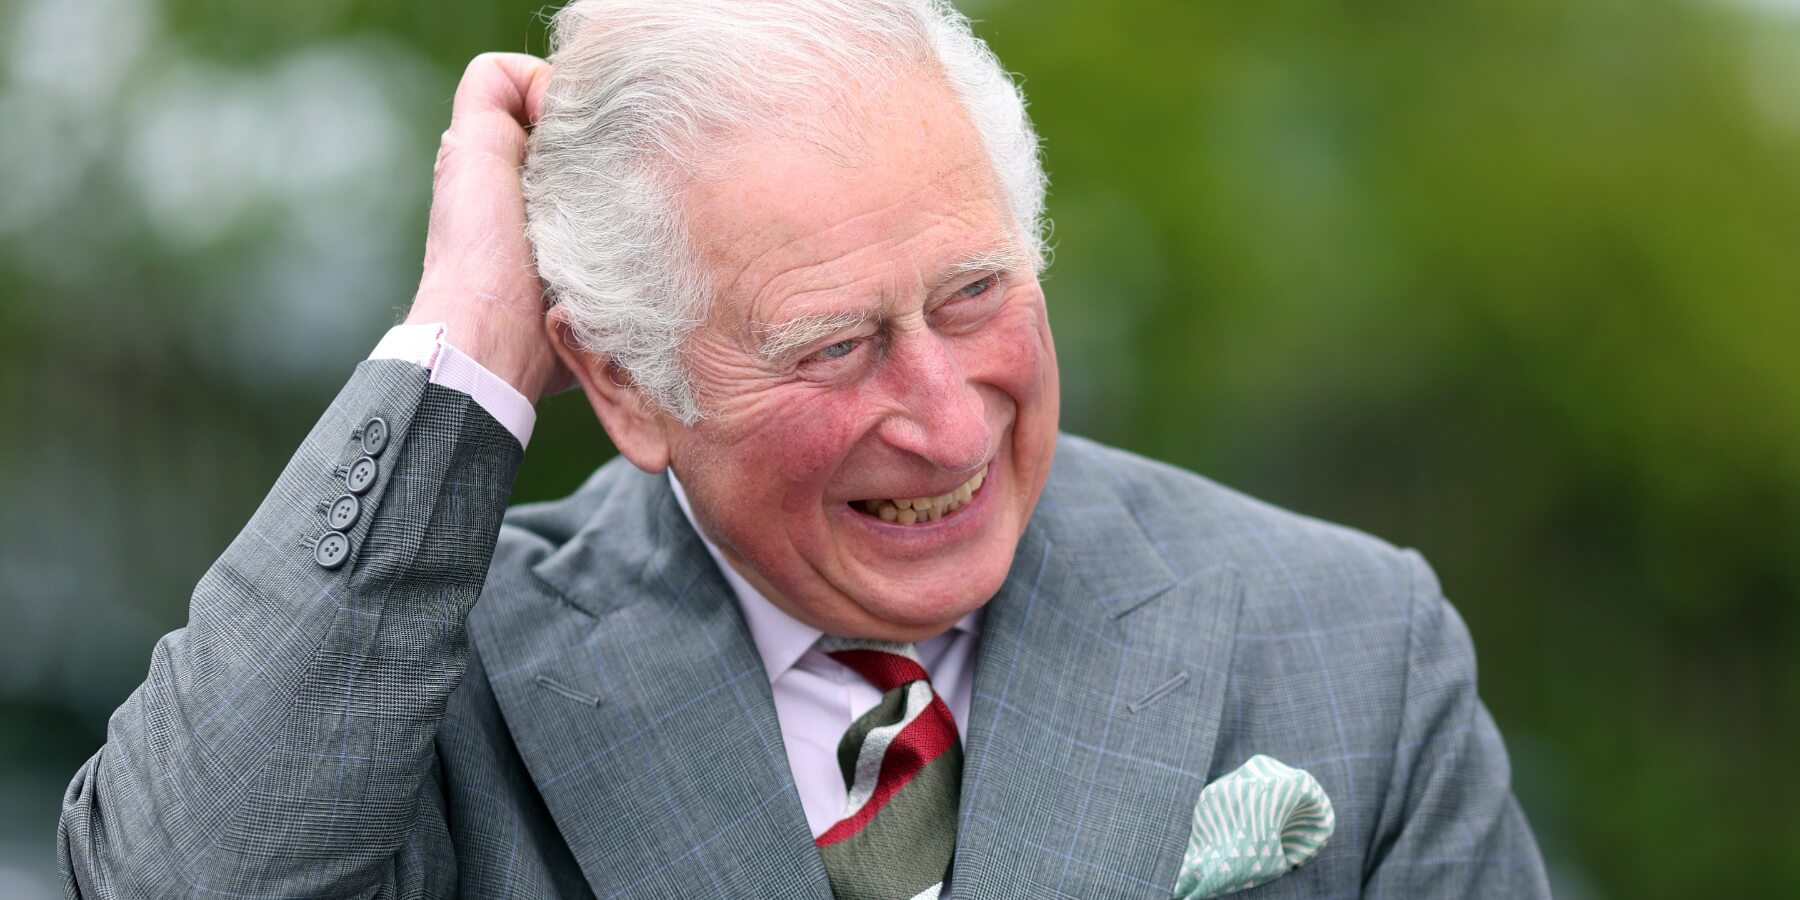 King Charles is photographed laughing on May 14, 2021 in Cardiff, United Kingdom.